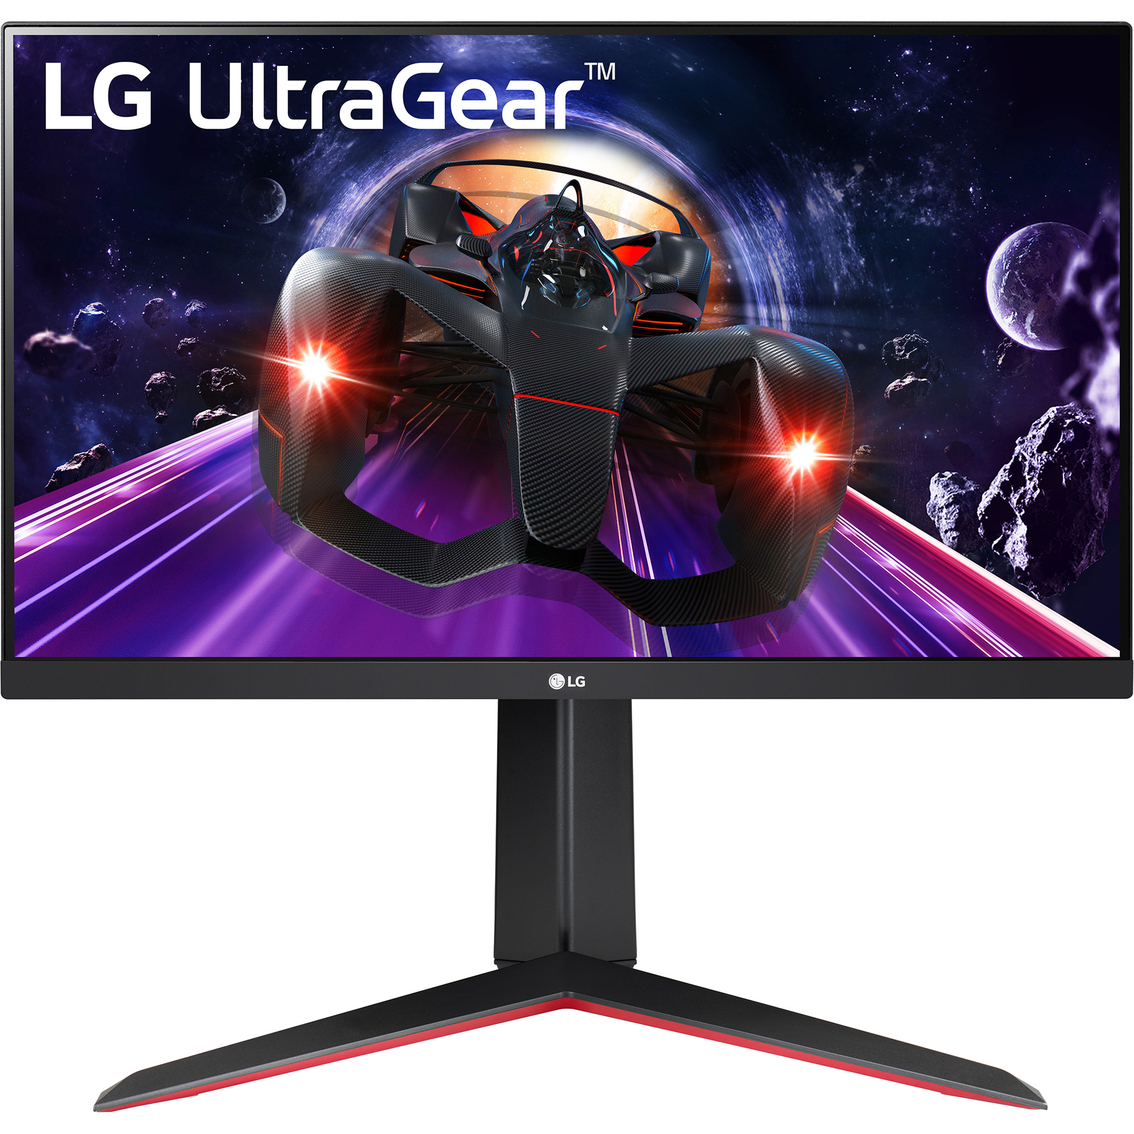 LG UltraGear 24 in. 144Hz FHD IPS HDR Gaming Monitor with FreeSync 24GN650-B